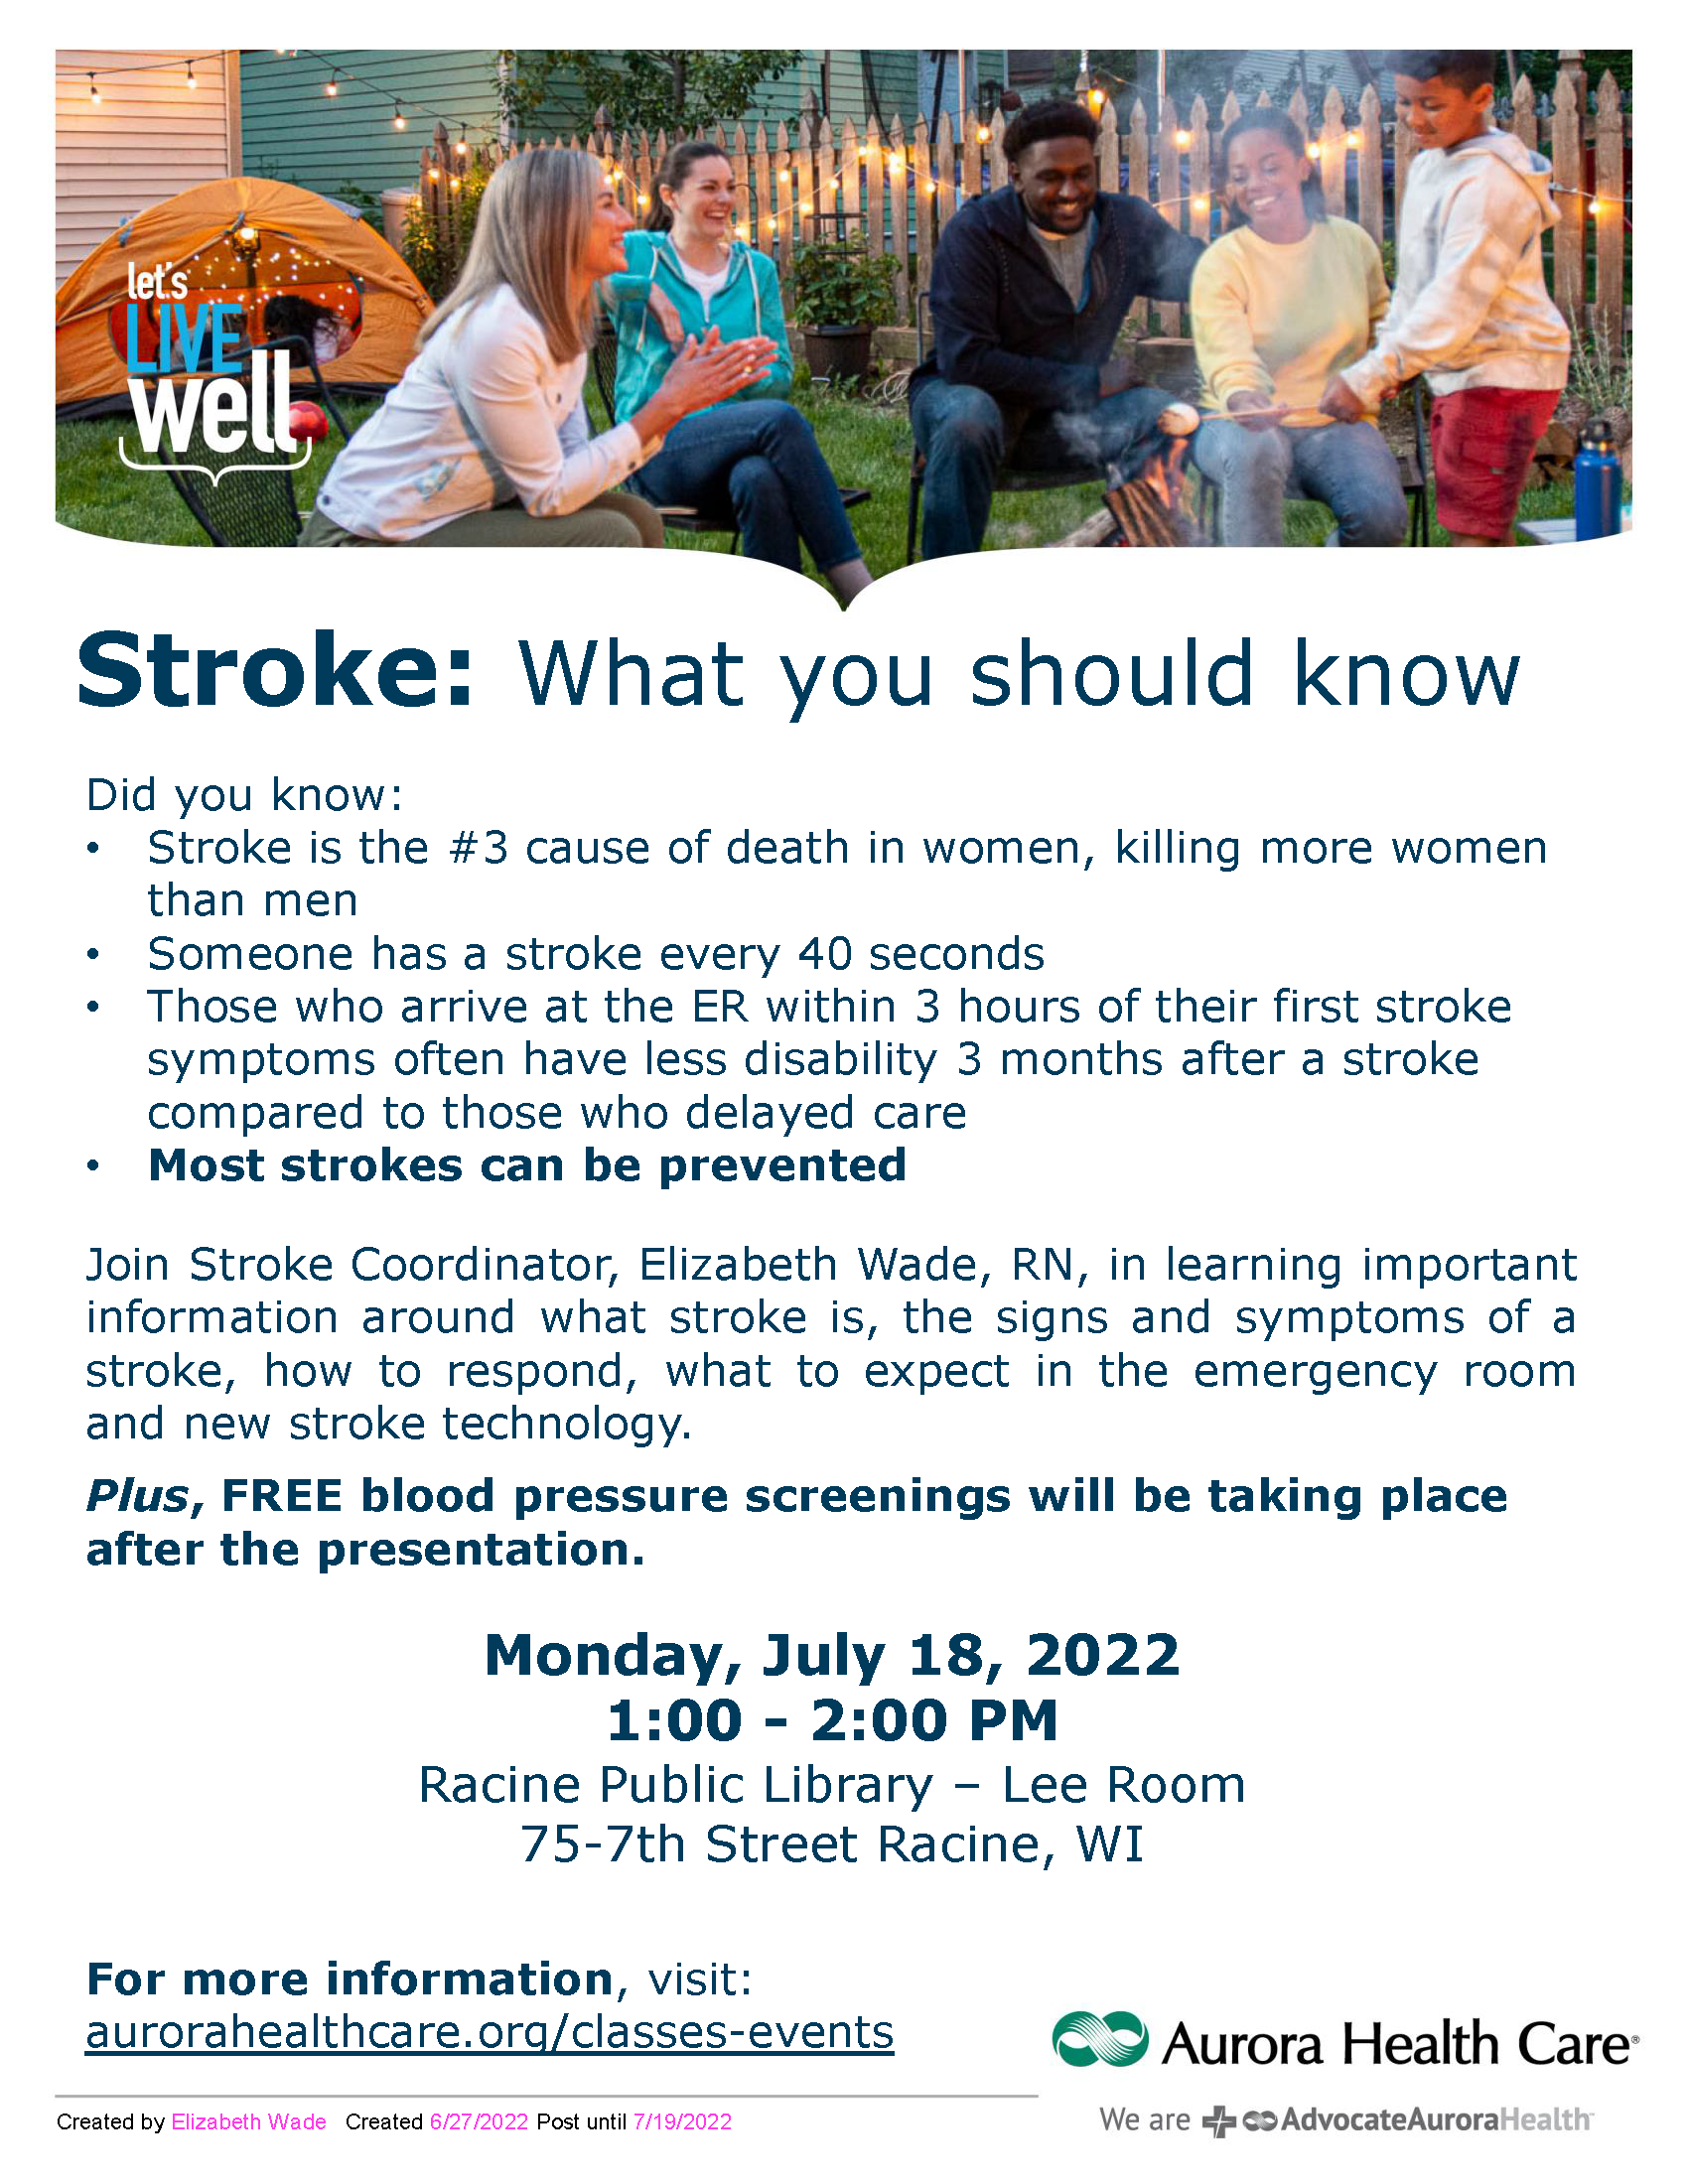 events Created by Elizabeth Wade Created 6/27/2022 Post until 7/19/2022 Stroke: What you should know. Did you know: • Stroke is the #3 cause of death in women, killing more women than men • Someone has a stroke every 40 seconds • Those who arrive at the ER within 3 hours of their first stroke symptoms often have less disability 3 months after a stroke compared to those who delayed care • Most strokes can be prevented Join Stroke Coordinator, Elizabeth Wade, RN, in learning important information around what stroke is, the signs and symptoms of a stroke, how to respond, what to expect in the emergency room and new stroke technology Plus , FREE blood pressure screenings will be taking place after the presentation. Monday, July 18, 2022 1:00 2:00 PM Racine Public Library Lee Room 75 7th Street Racine, WI For more information , visit: aurorahealthcare.org/classes events